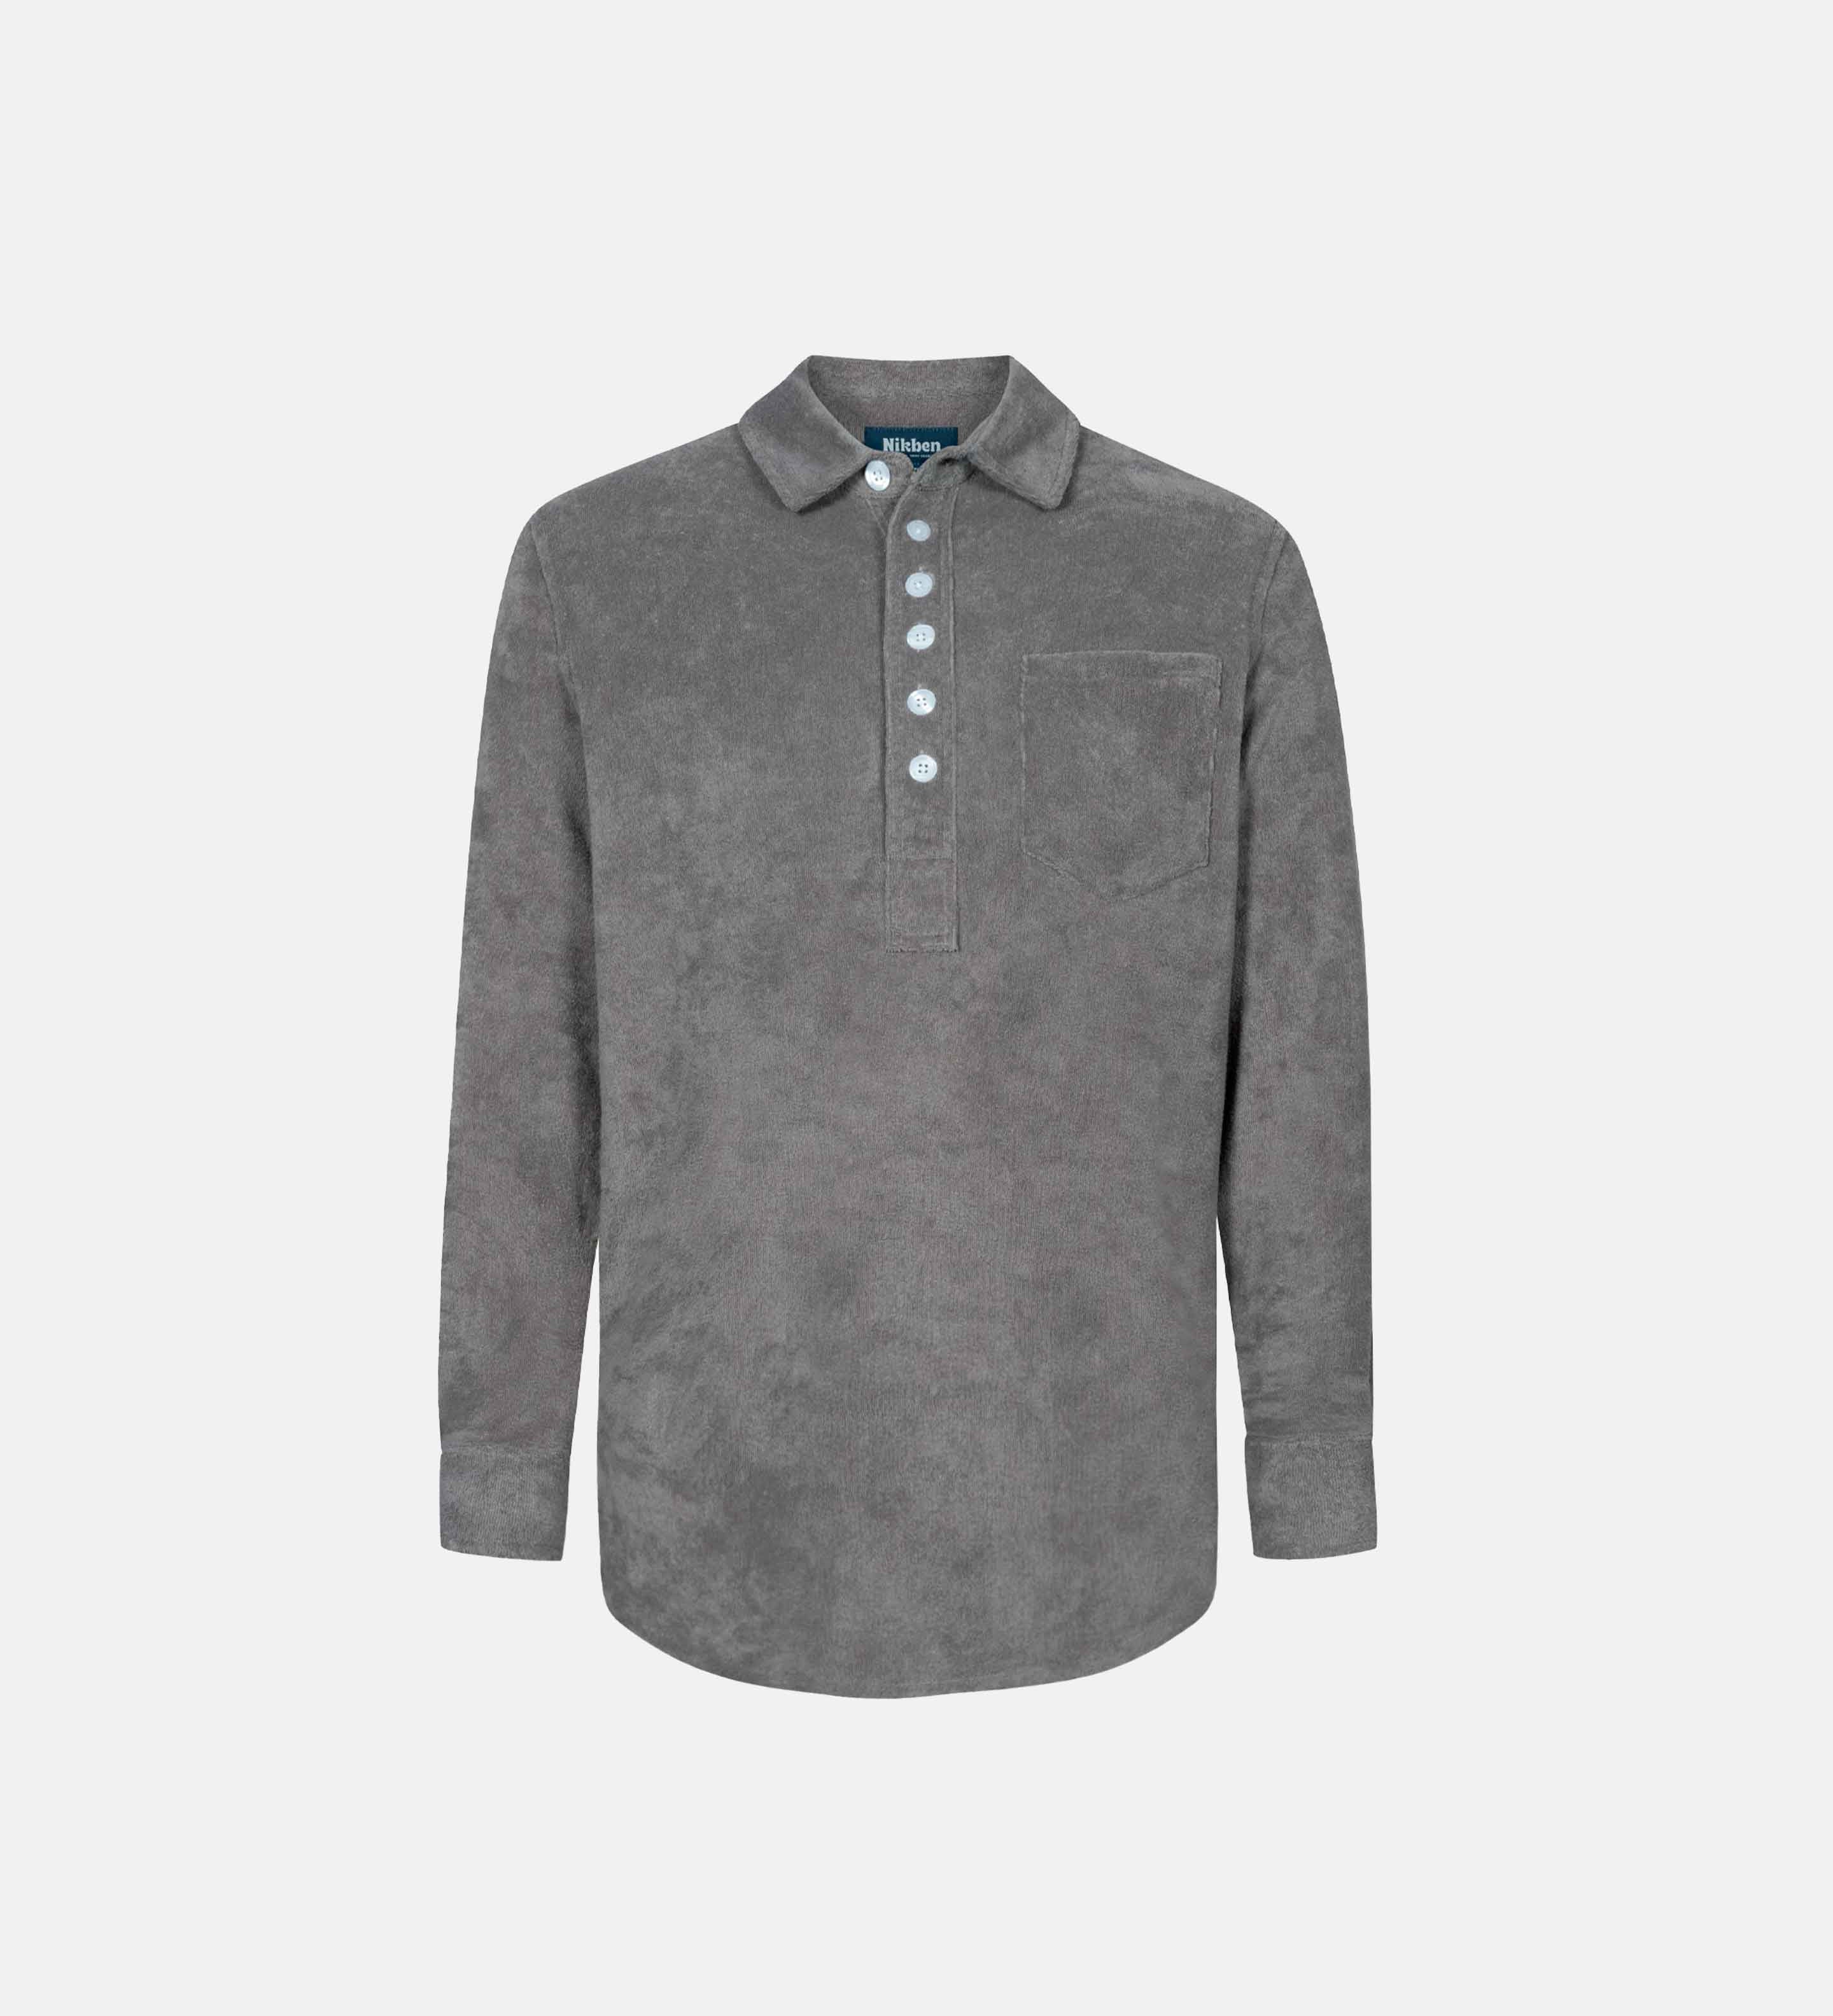 Long sleeve shirt in grey Terry toweling fabric with white buttons